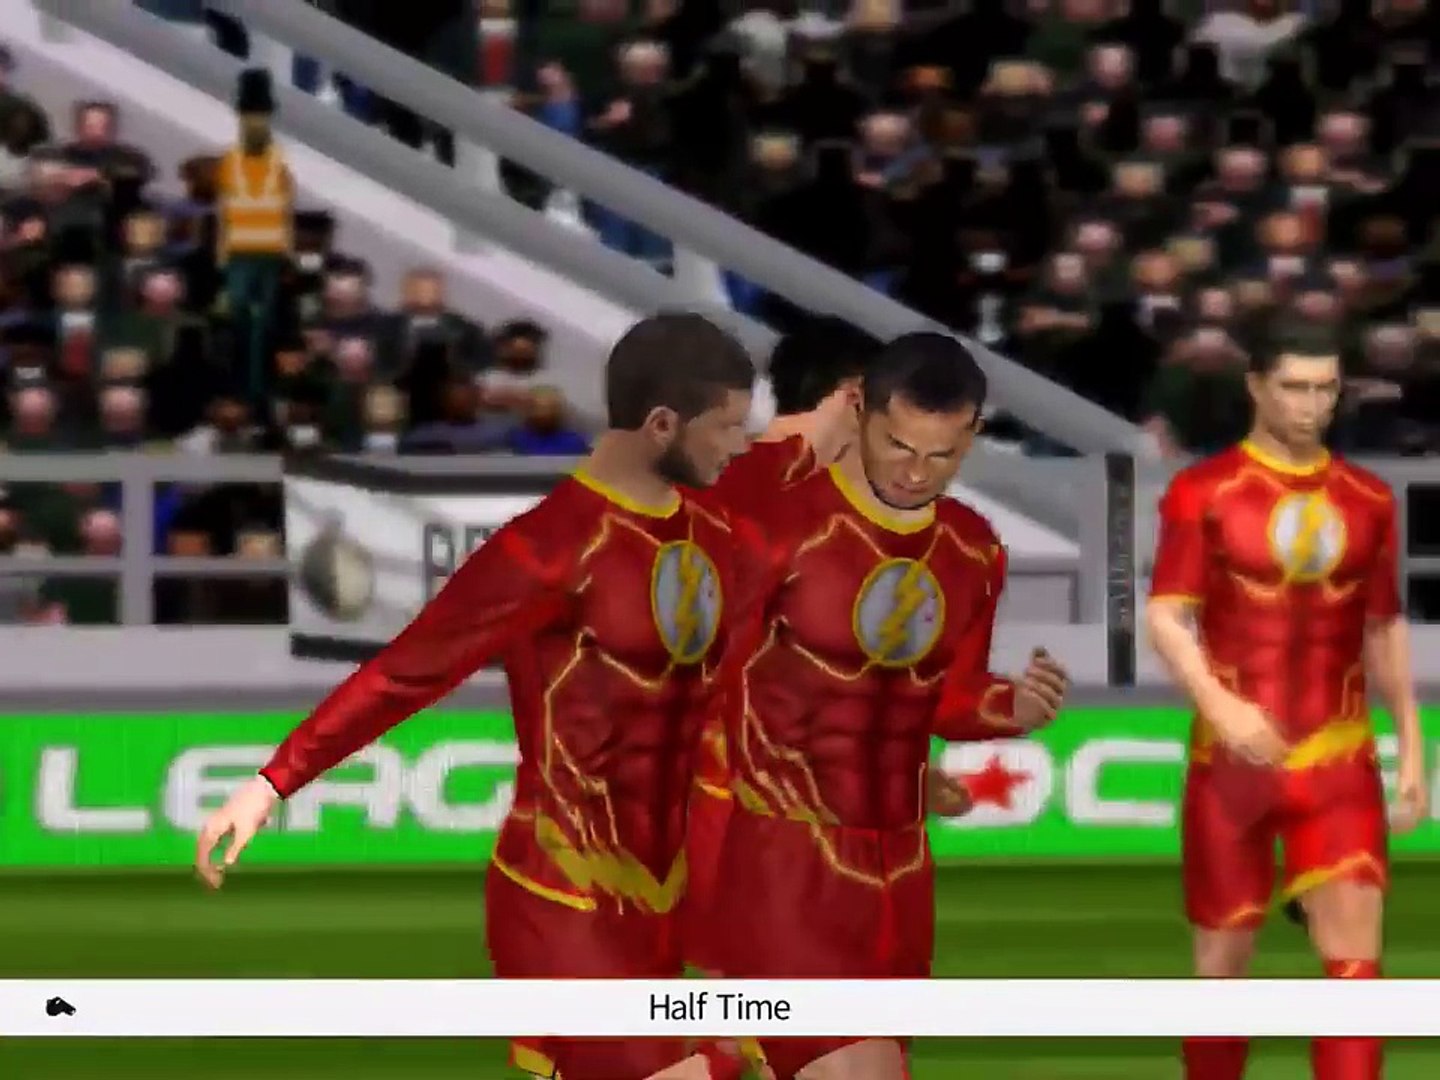 ⁣DREAM LEAGUE SOCCER / The Flash Kit / Android / iOS Gameplay Video